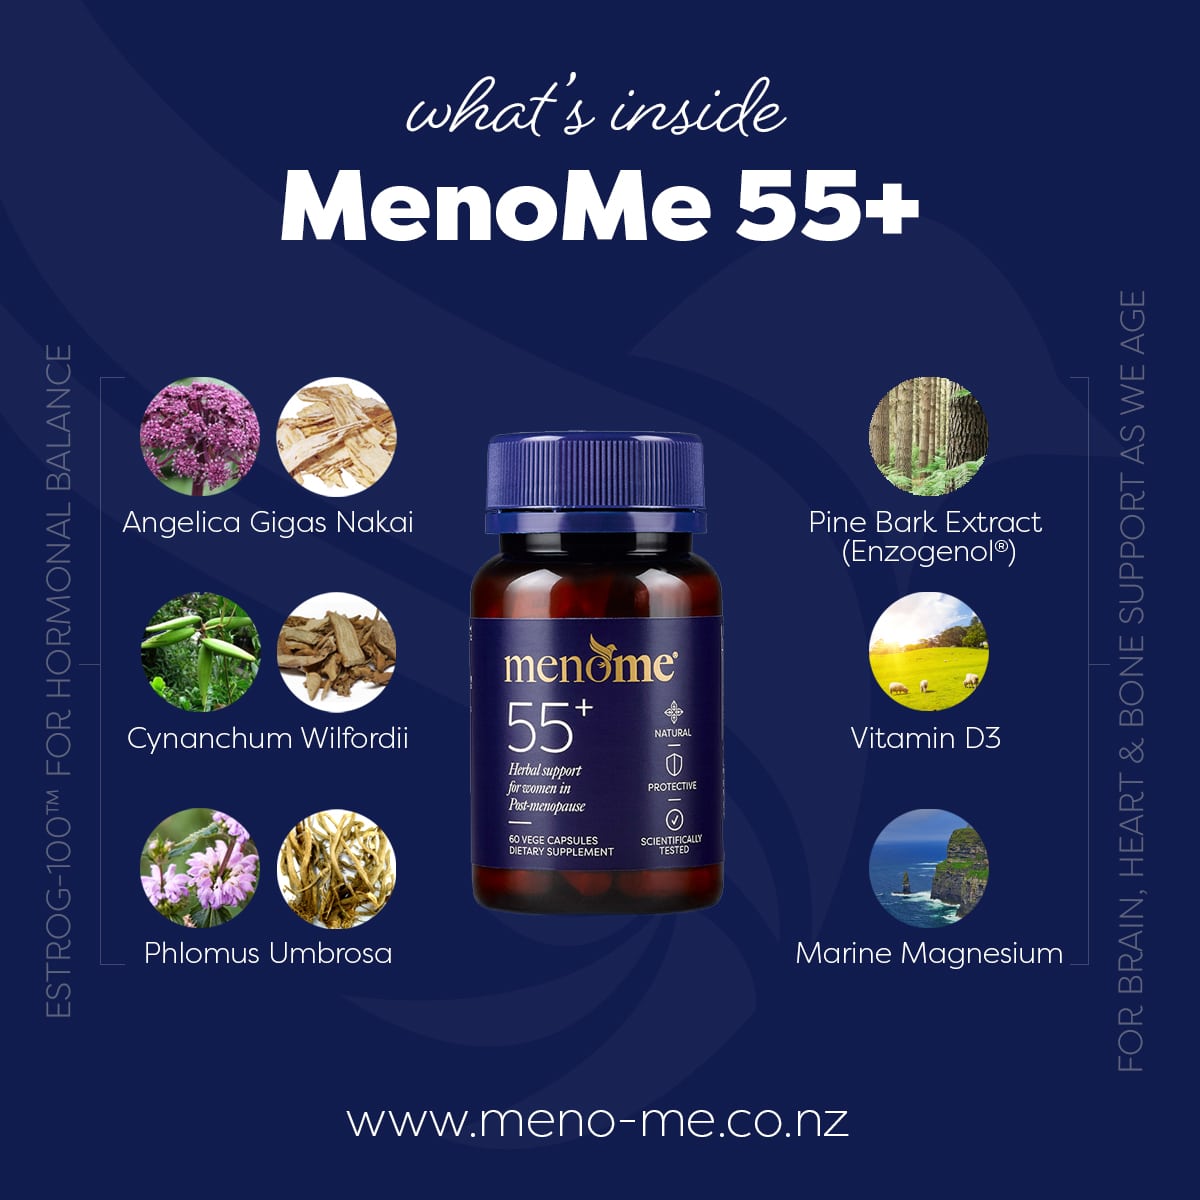 whats inside MenoMe55